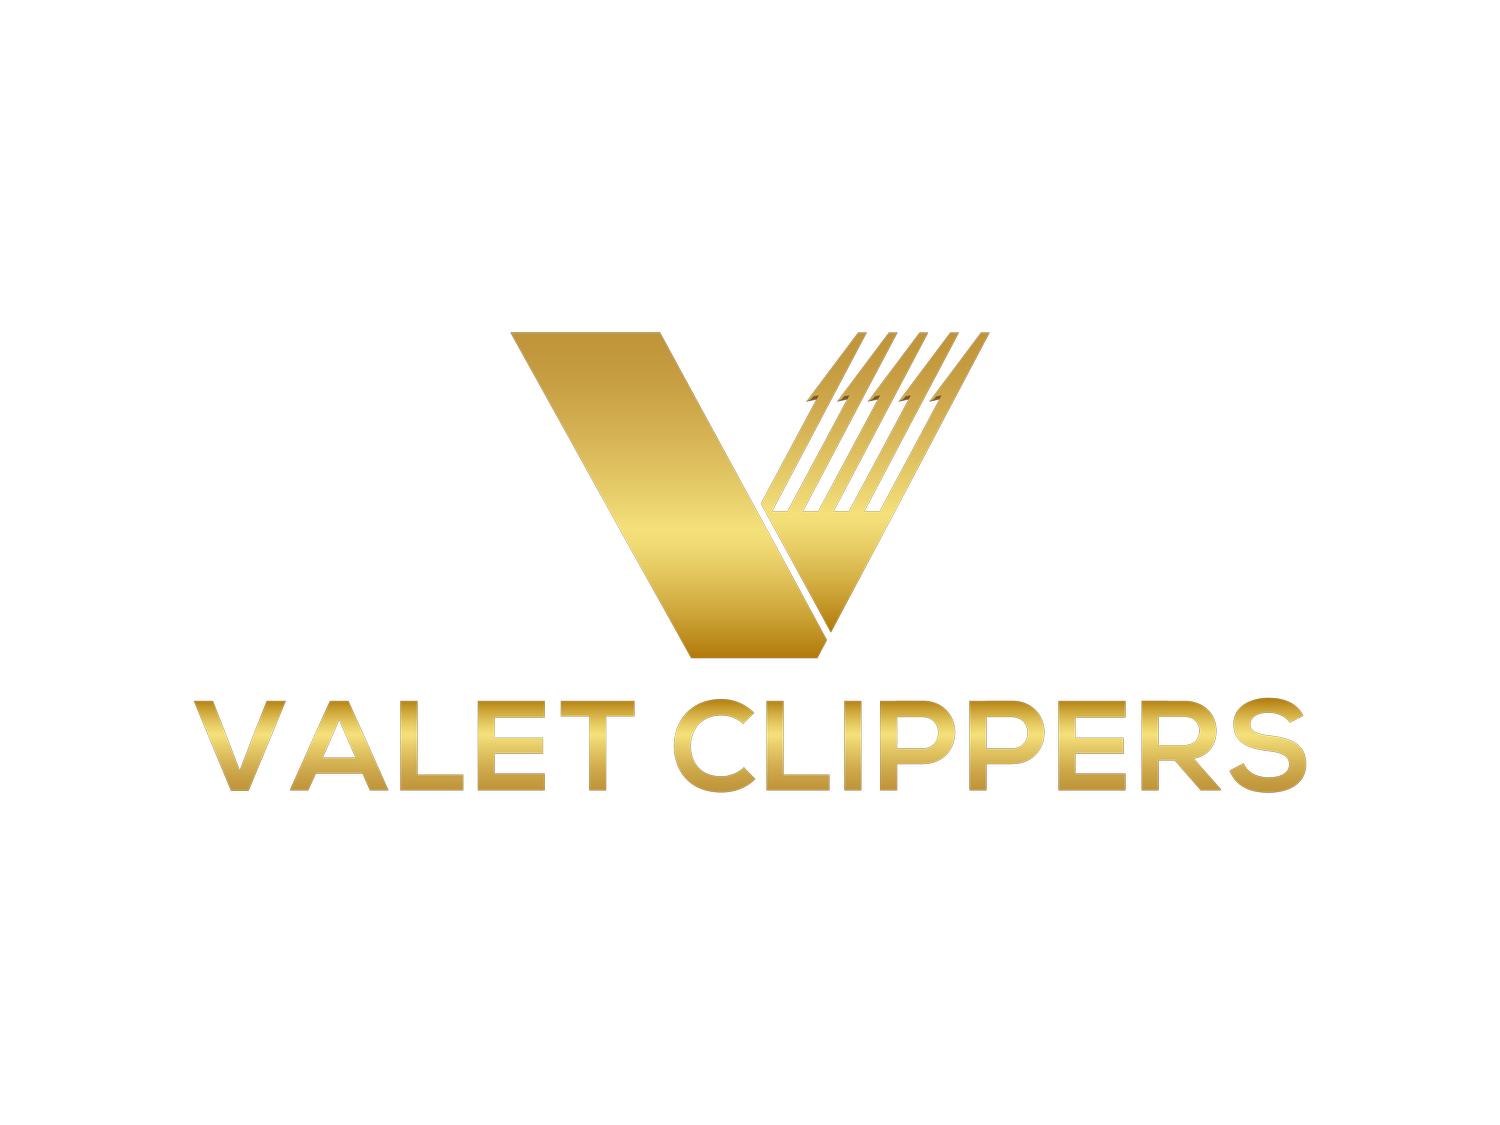 VALET CLIPPERS